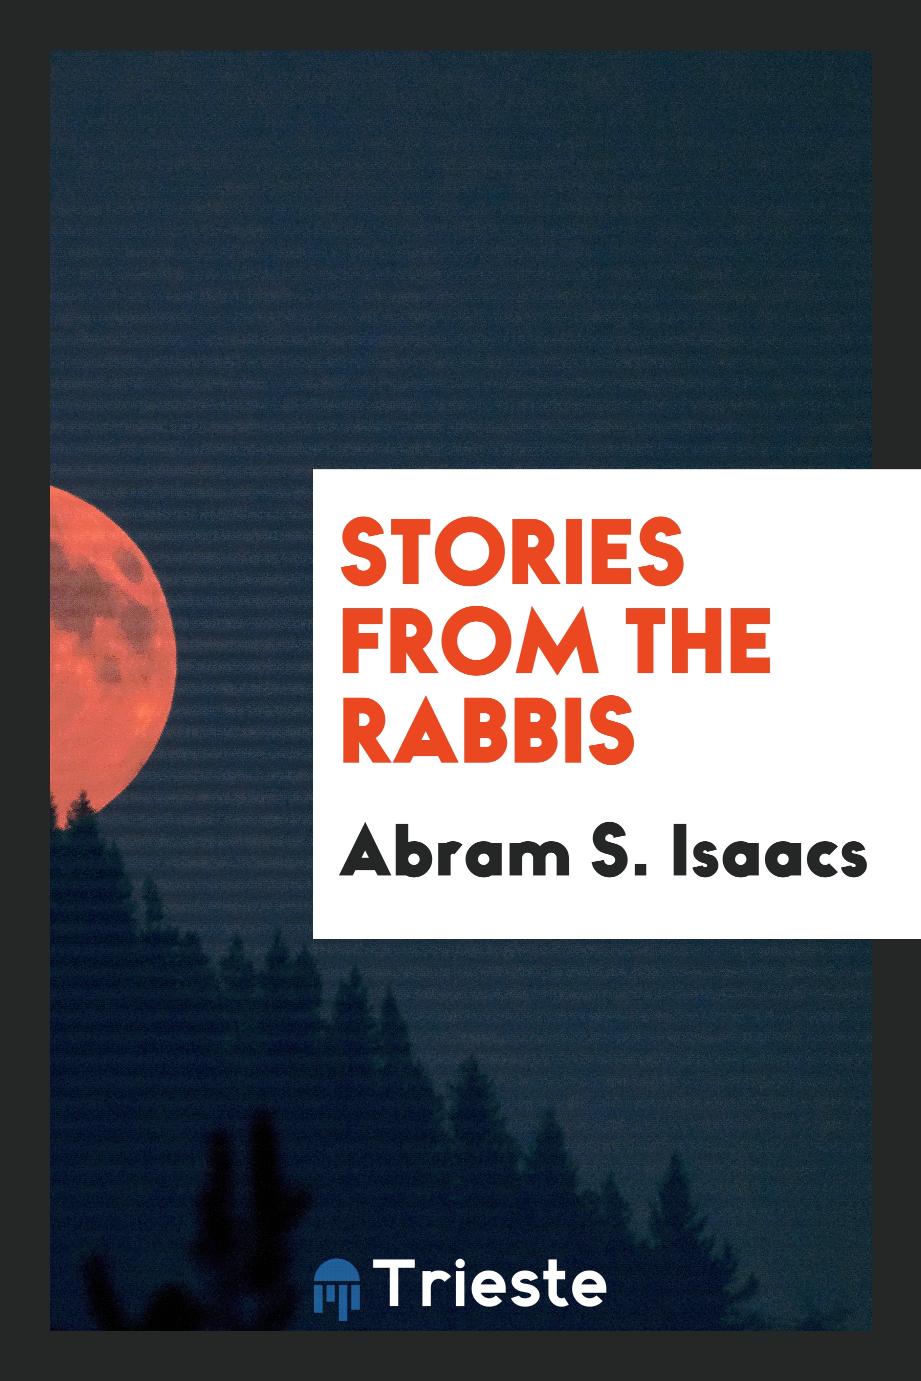 Stories from the rabbis